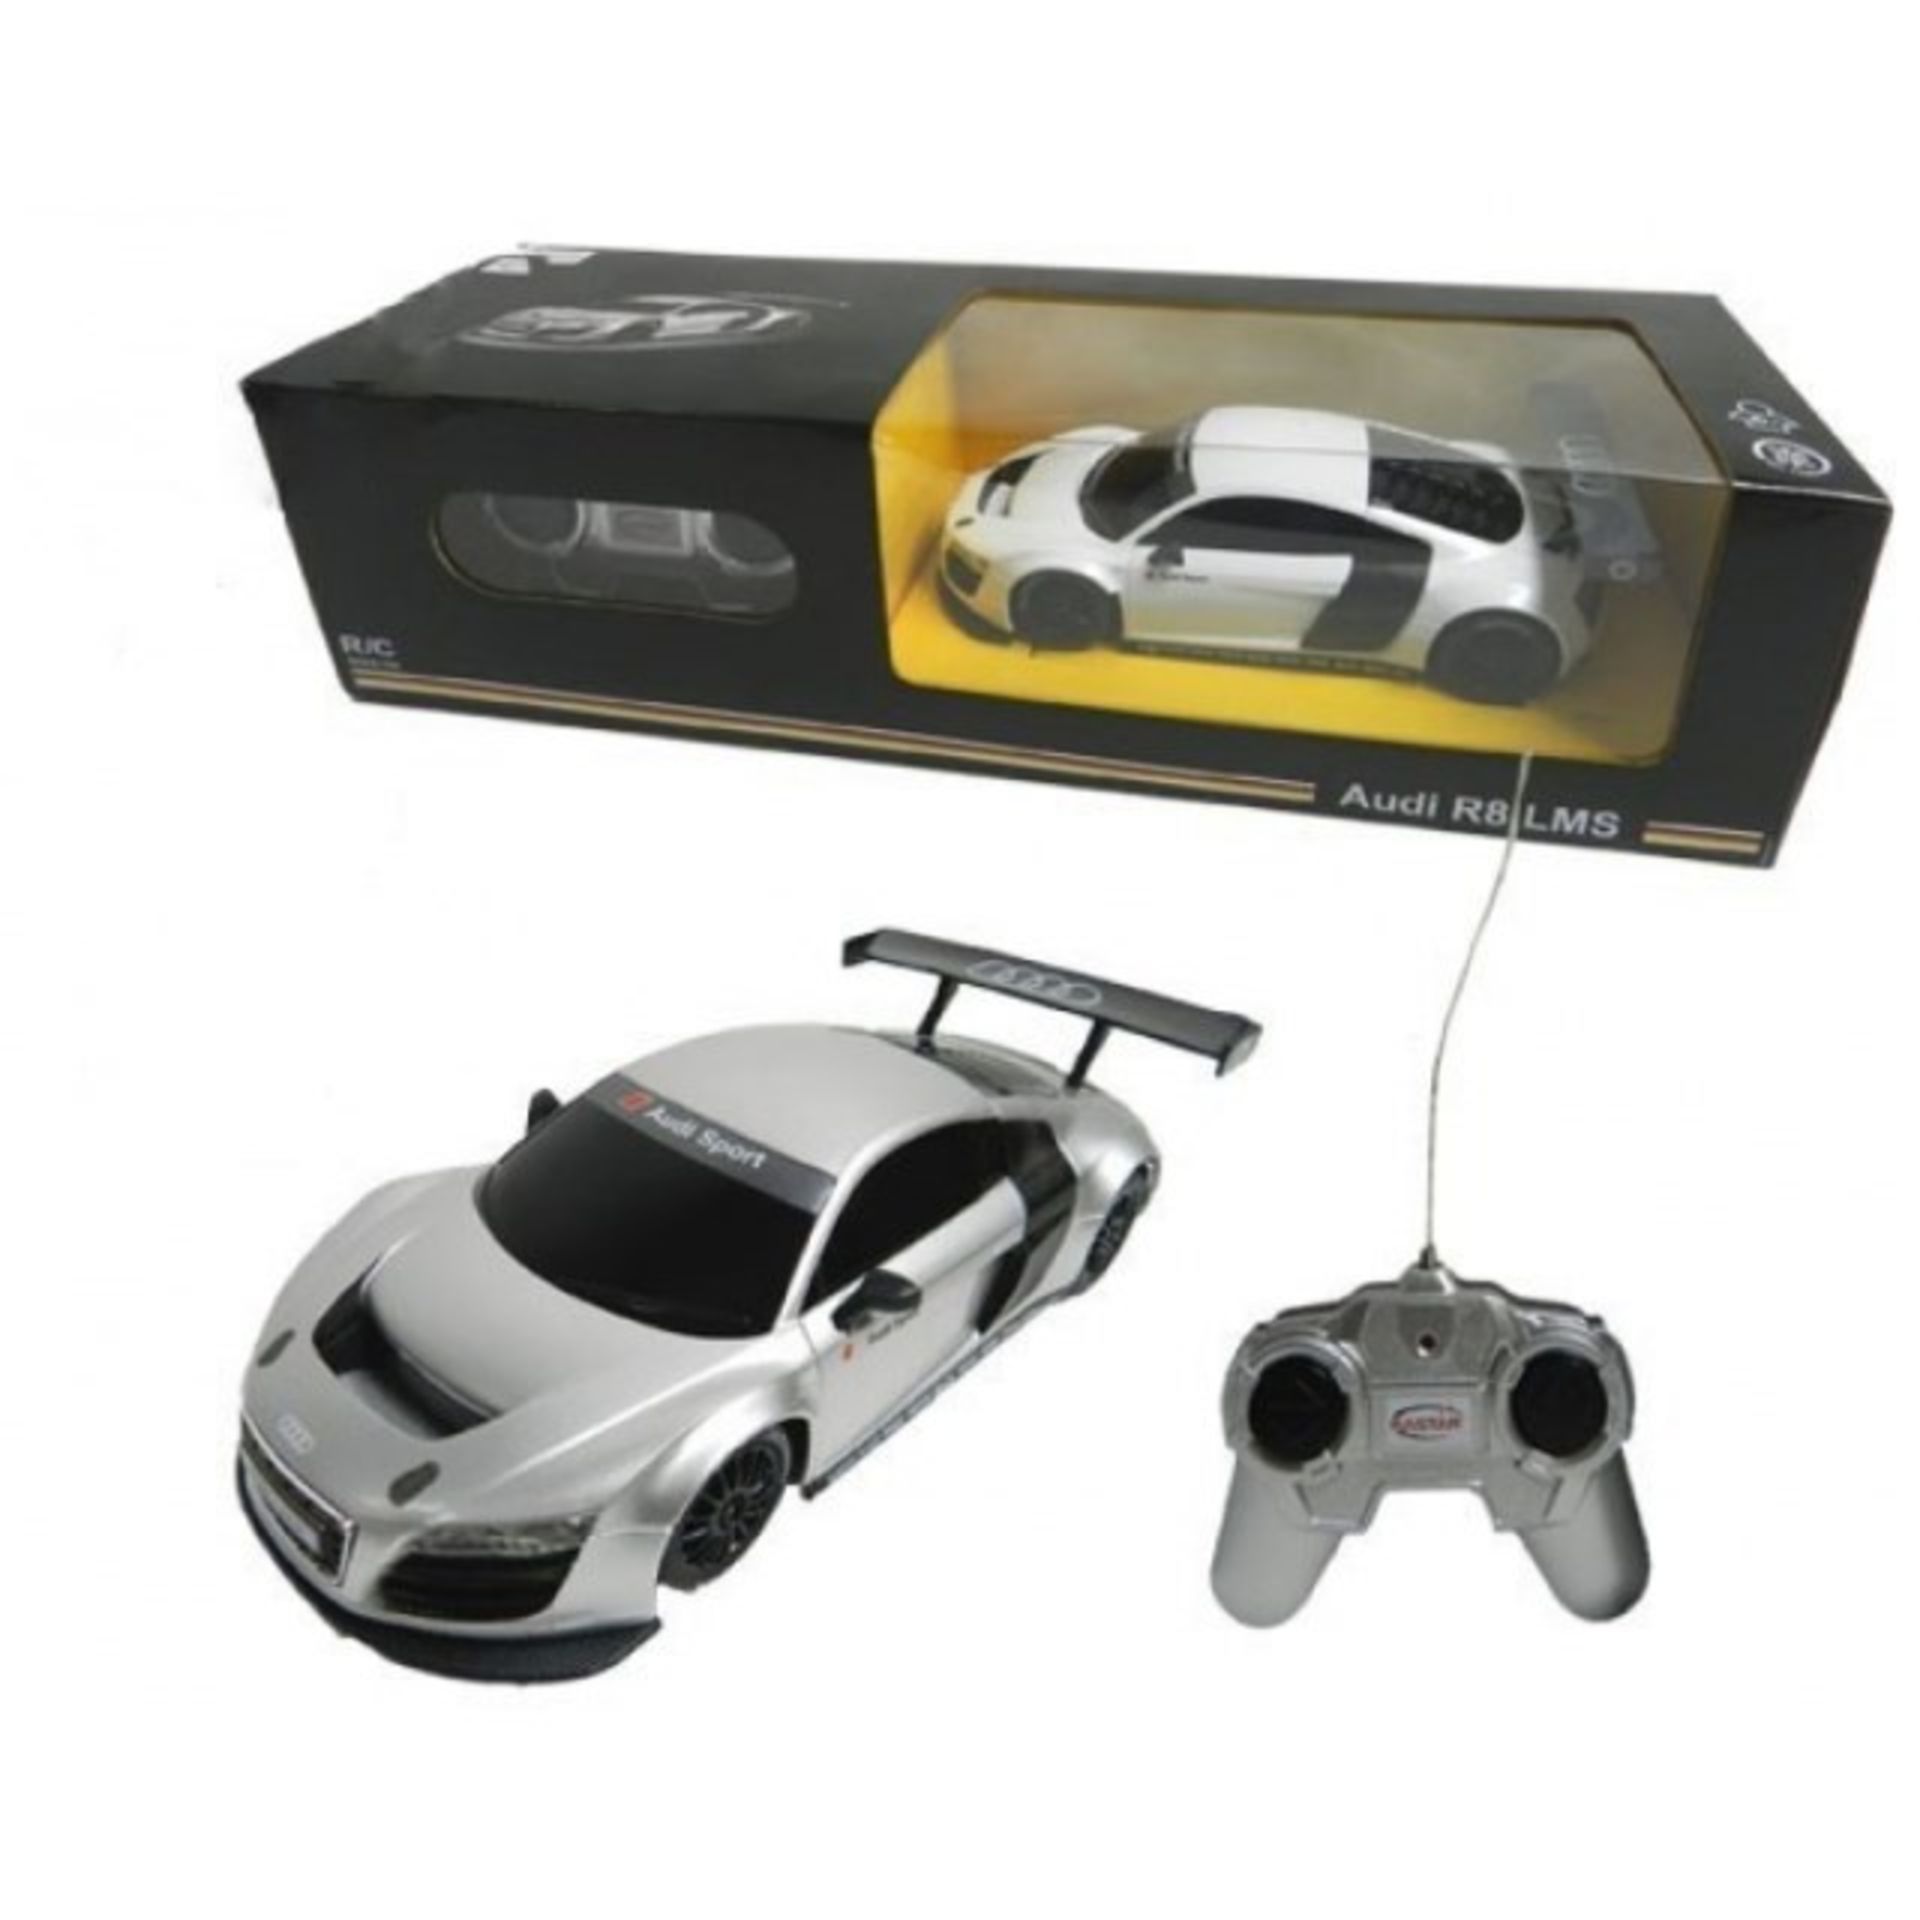 V Brand New 1:24 Scale Radio Control Audi R8 LMS - Officially Licensed Product - Colour May Vary X 2